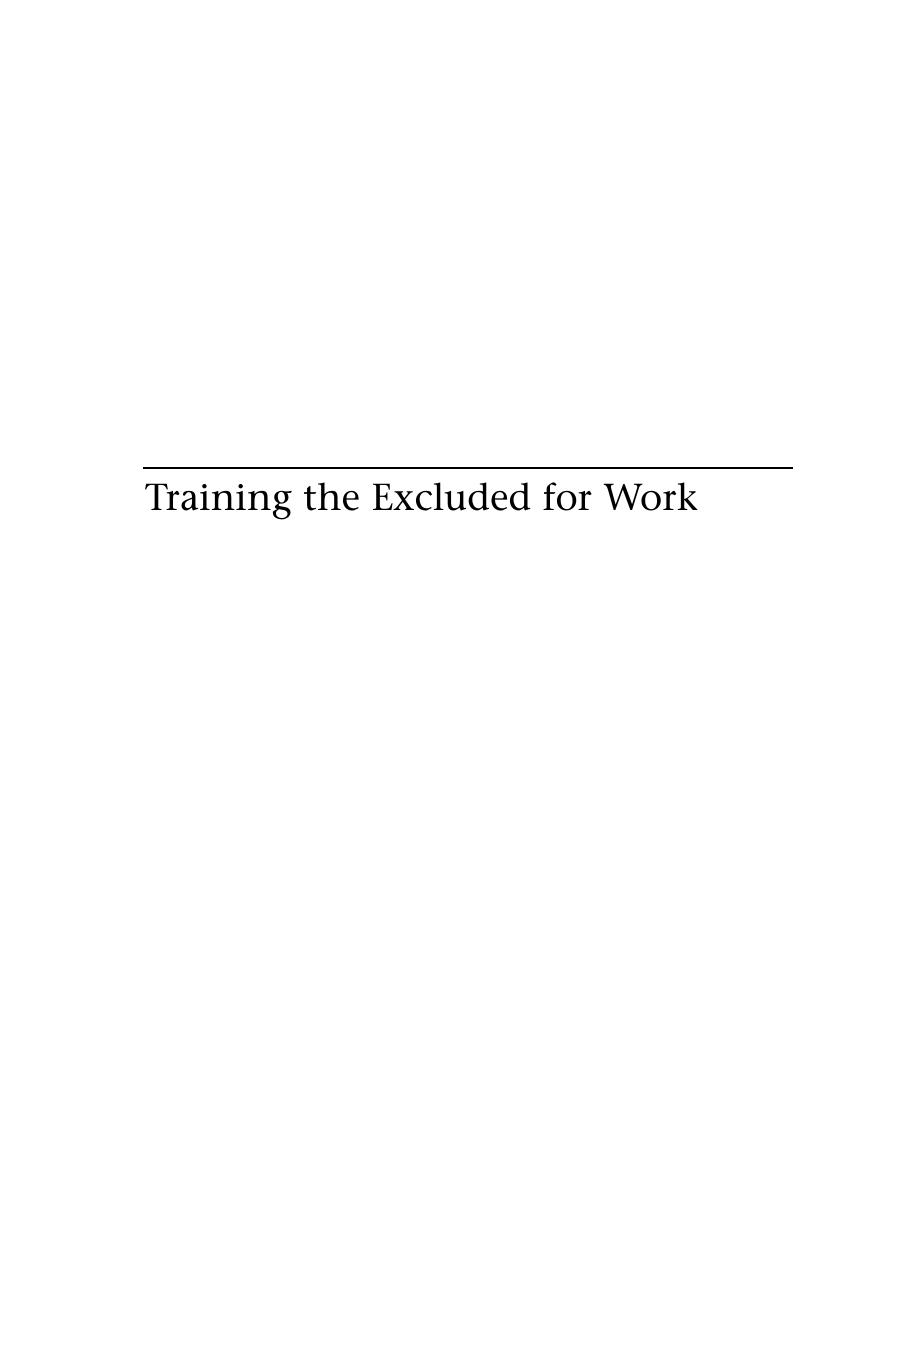 Training the Excluded for Work : Access and Equity for Women, Immigrants, First Nations, Youth, and People with Low Income by Marjorie Griffin Cohen